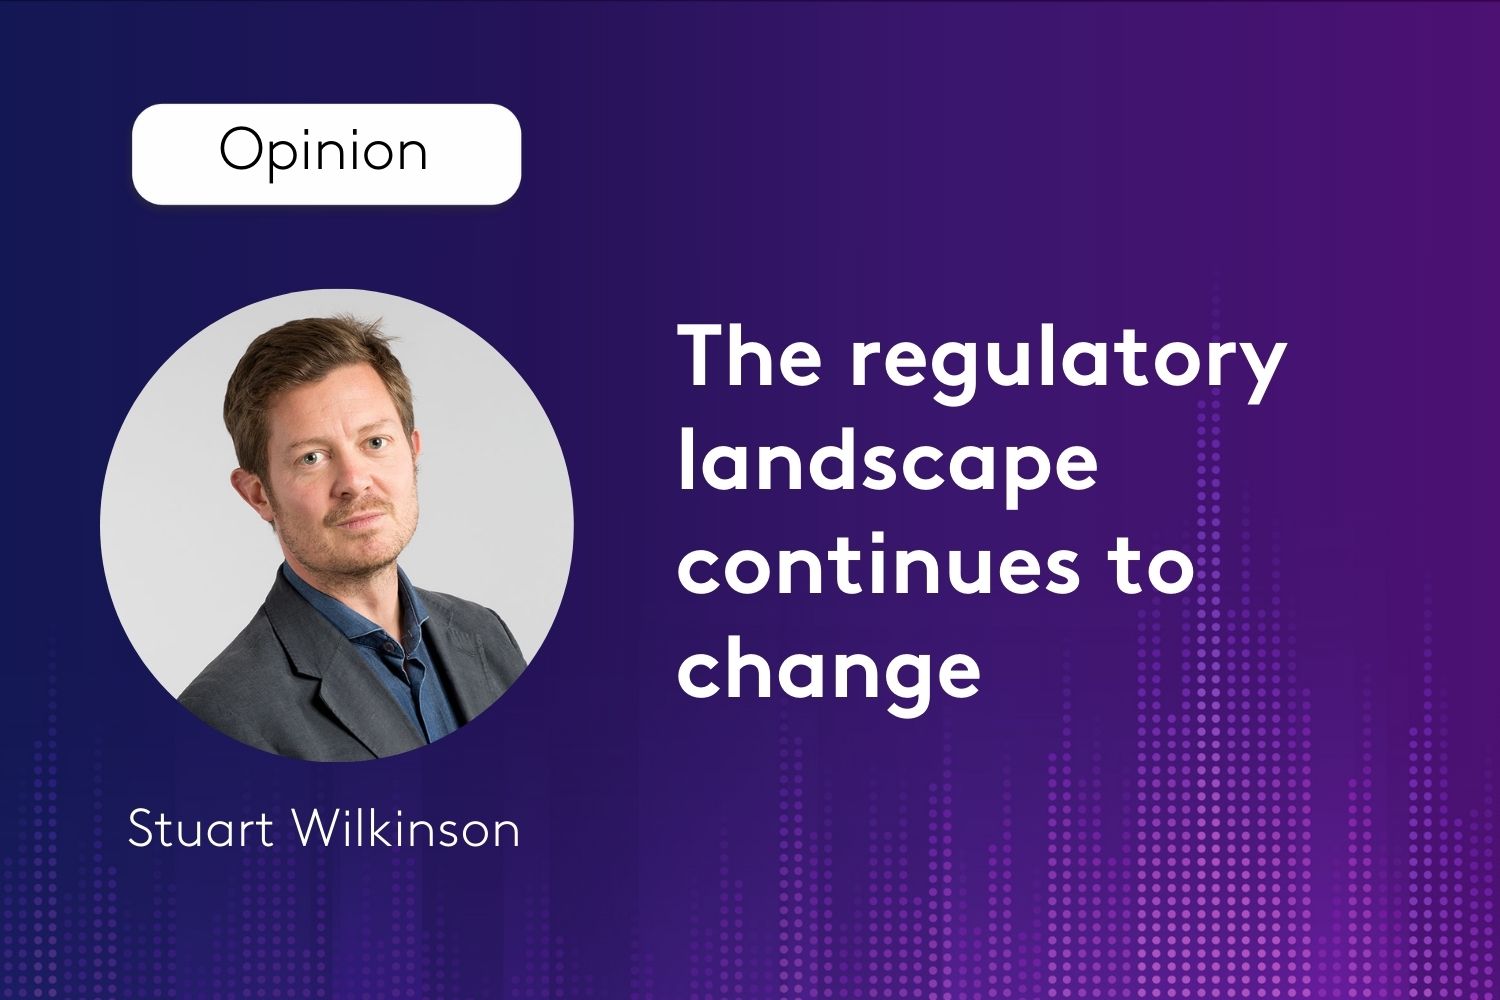 The regulatory landscape continues to change